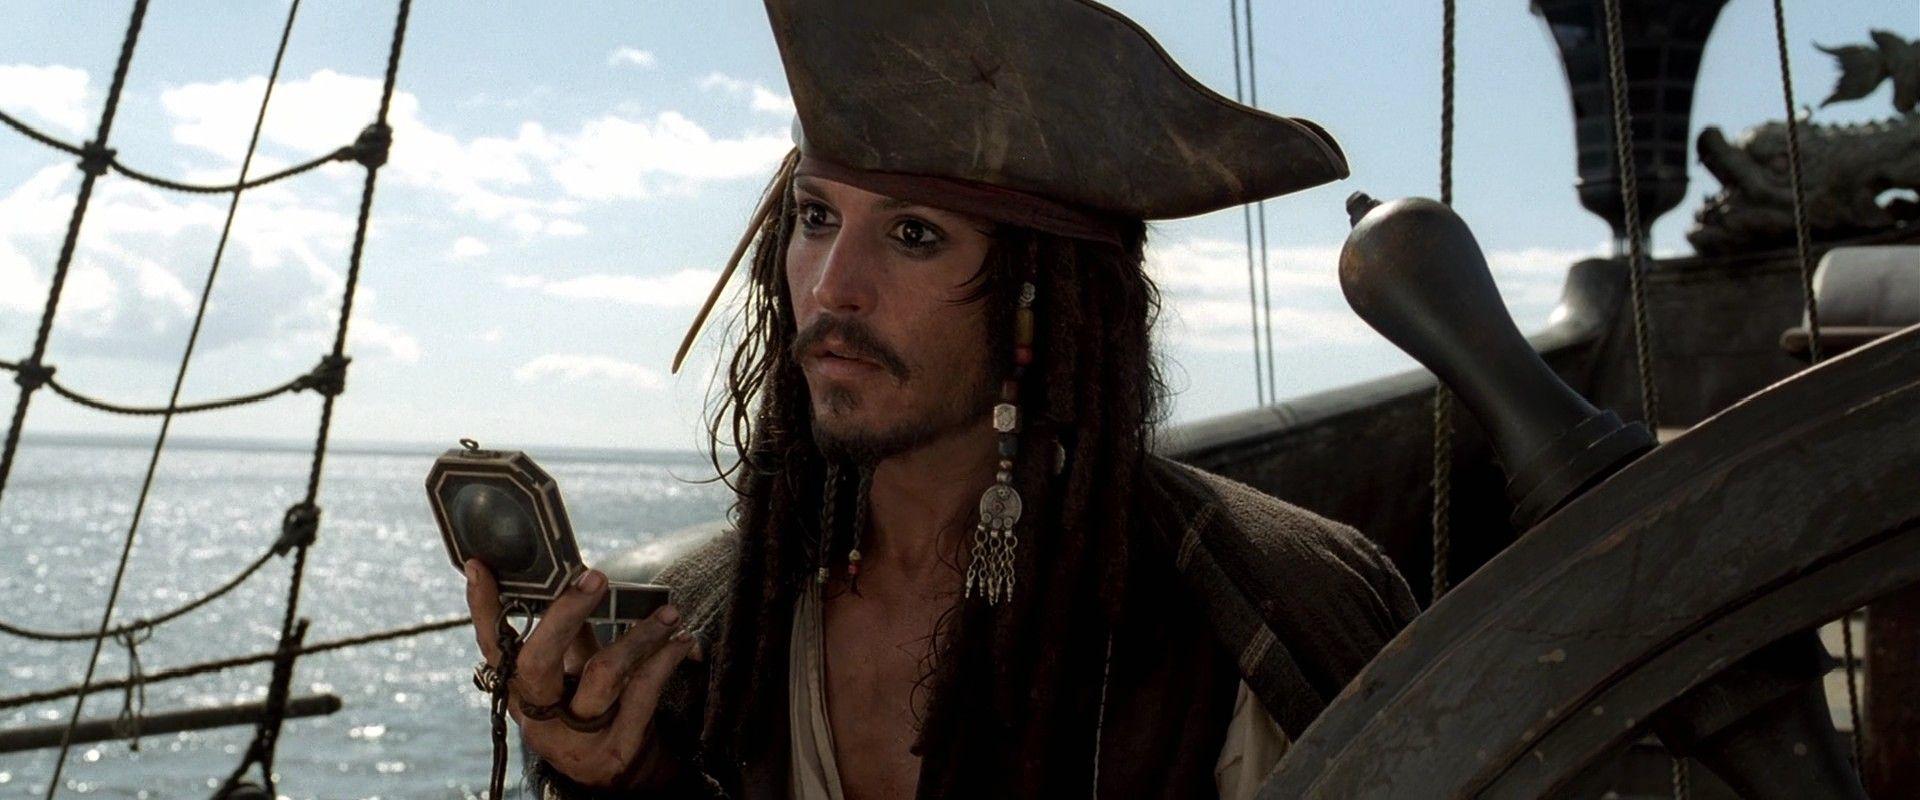 Pirates of the Caribbean image Curse Of The Black Pearl HD